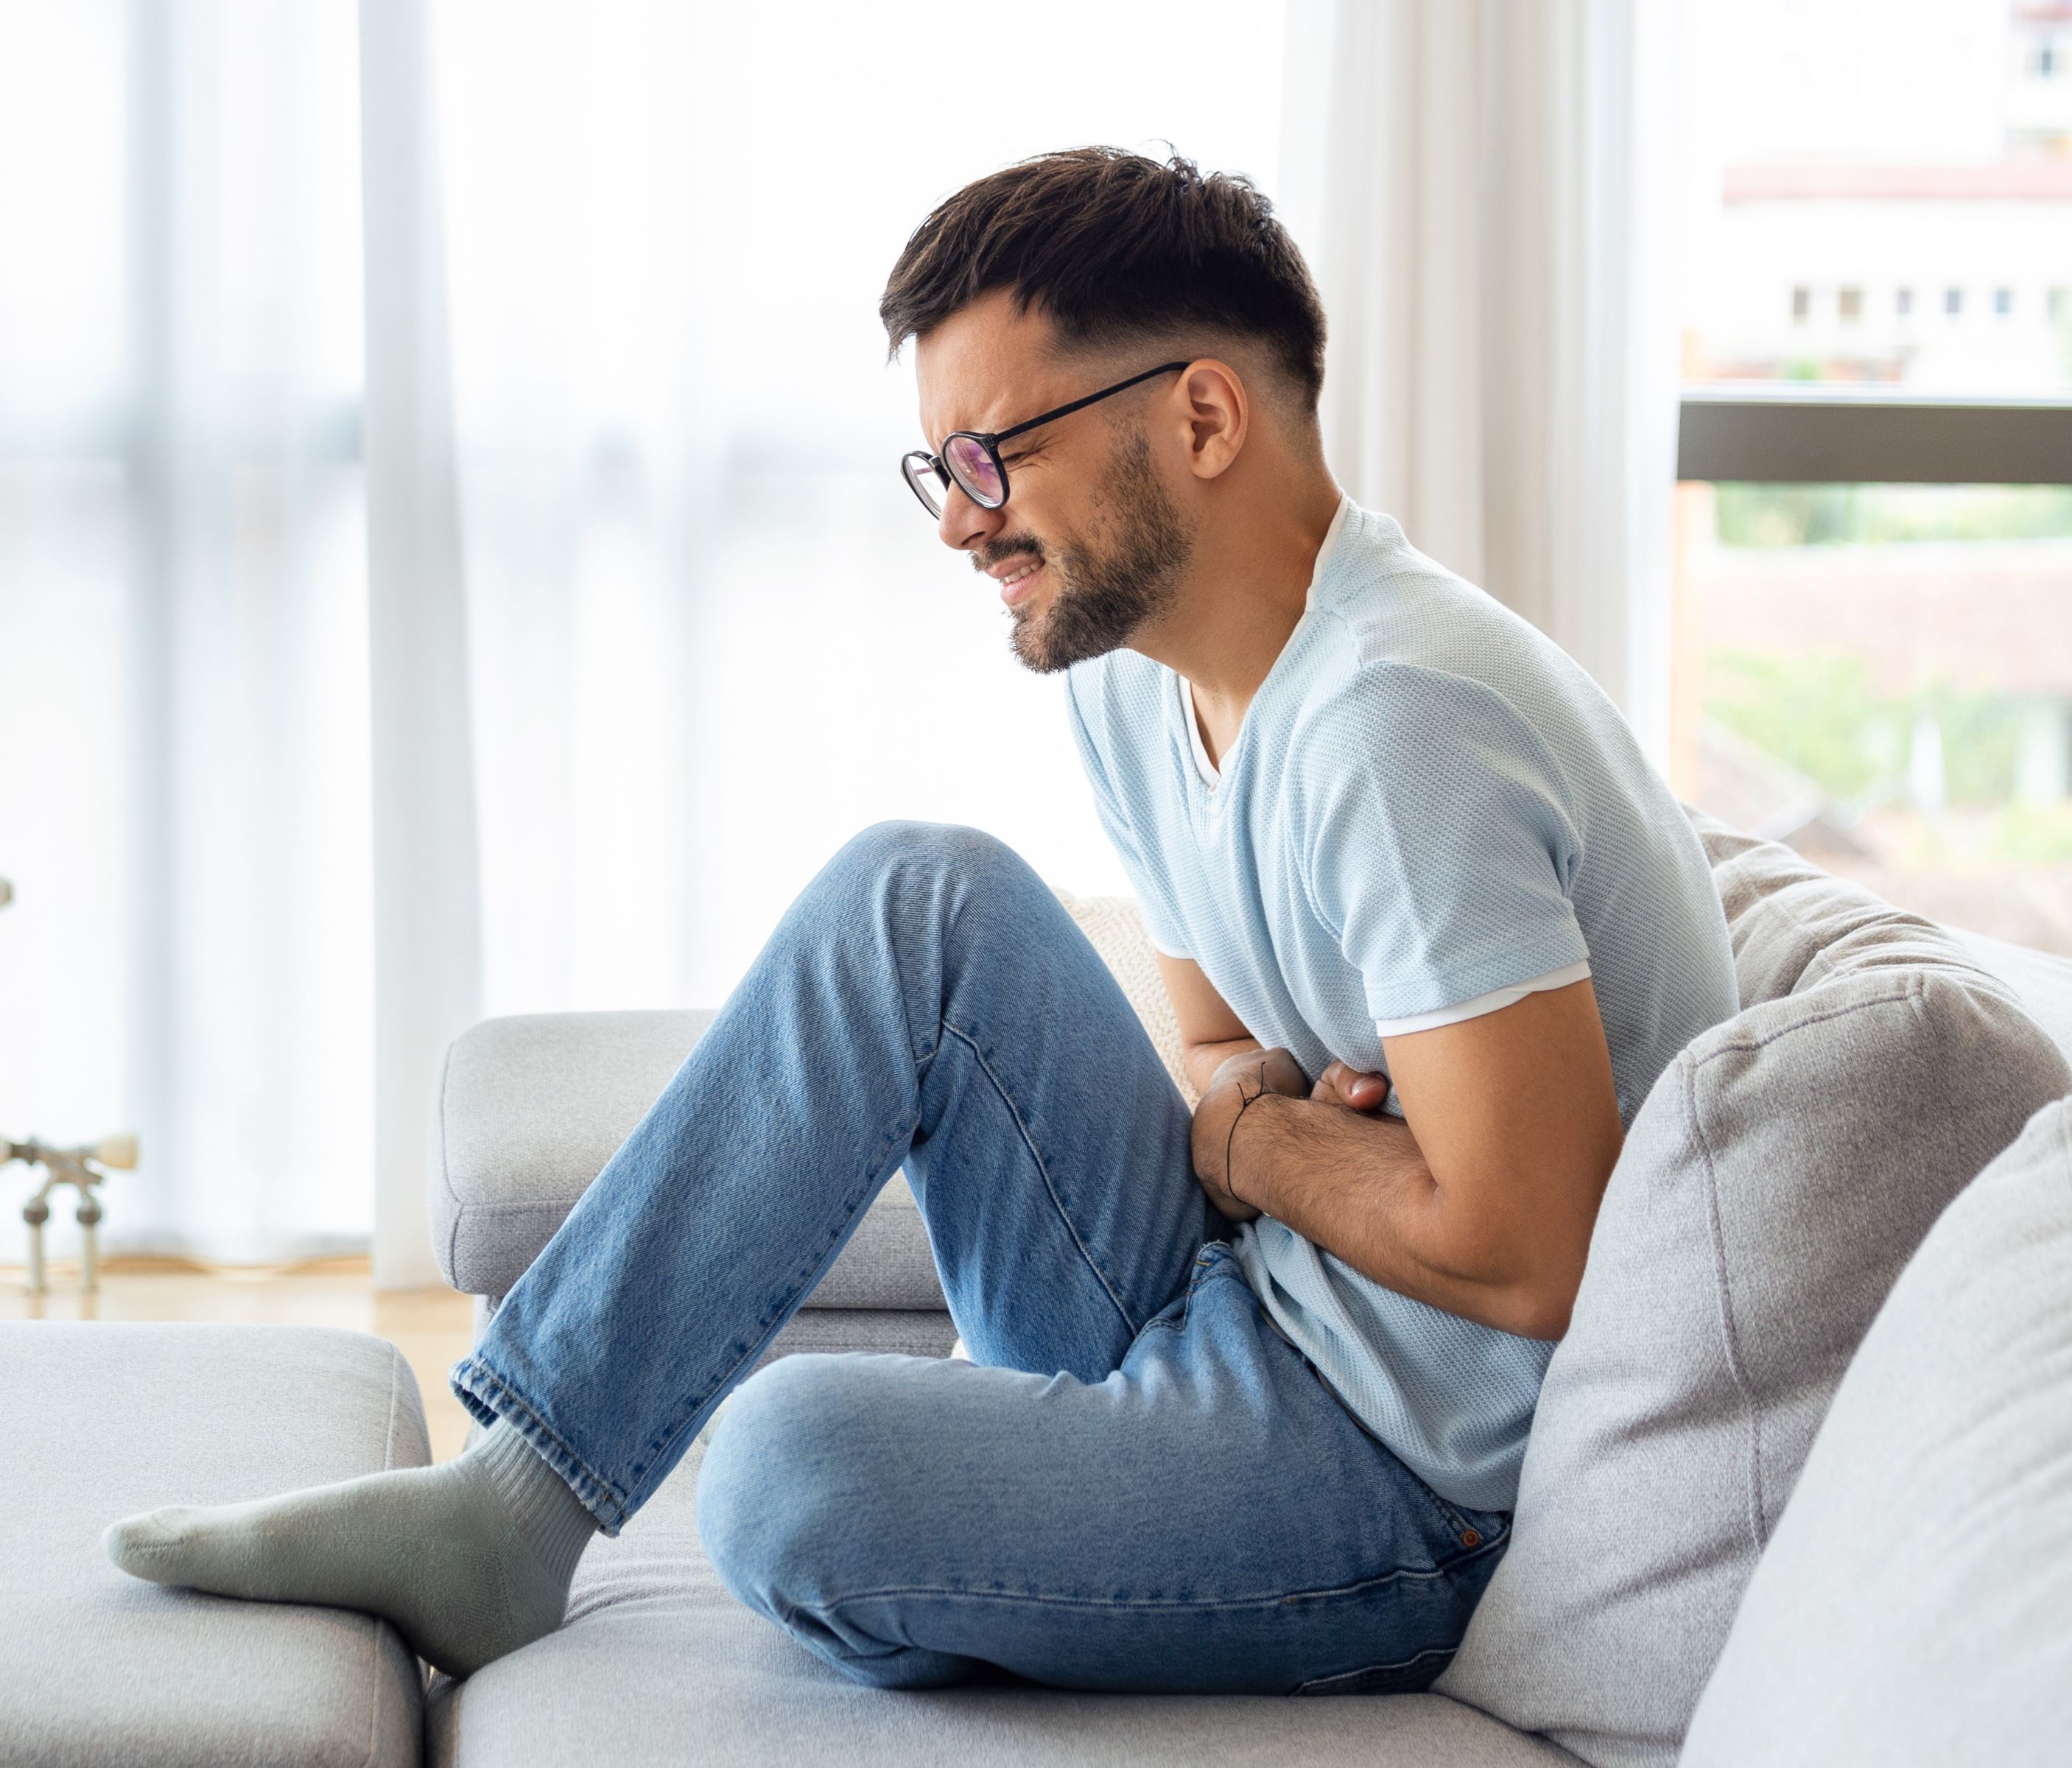 Man sitting on couch holding his stomach with look of discomfort on his face